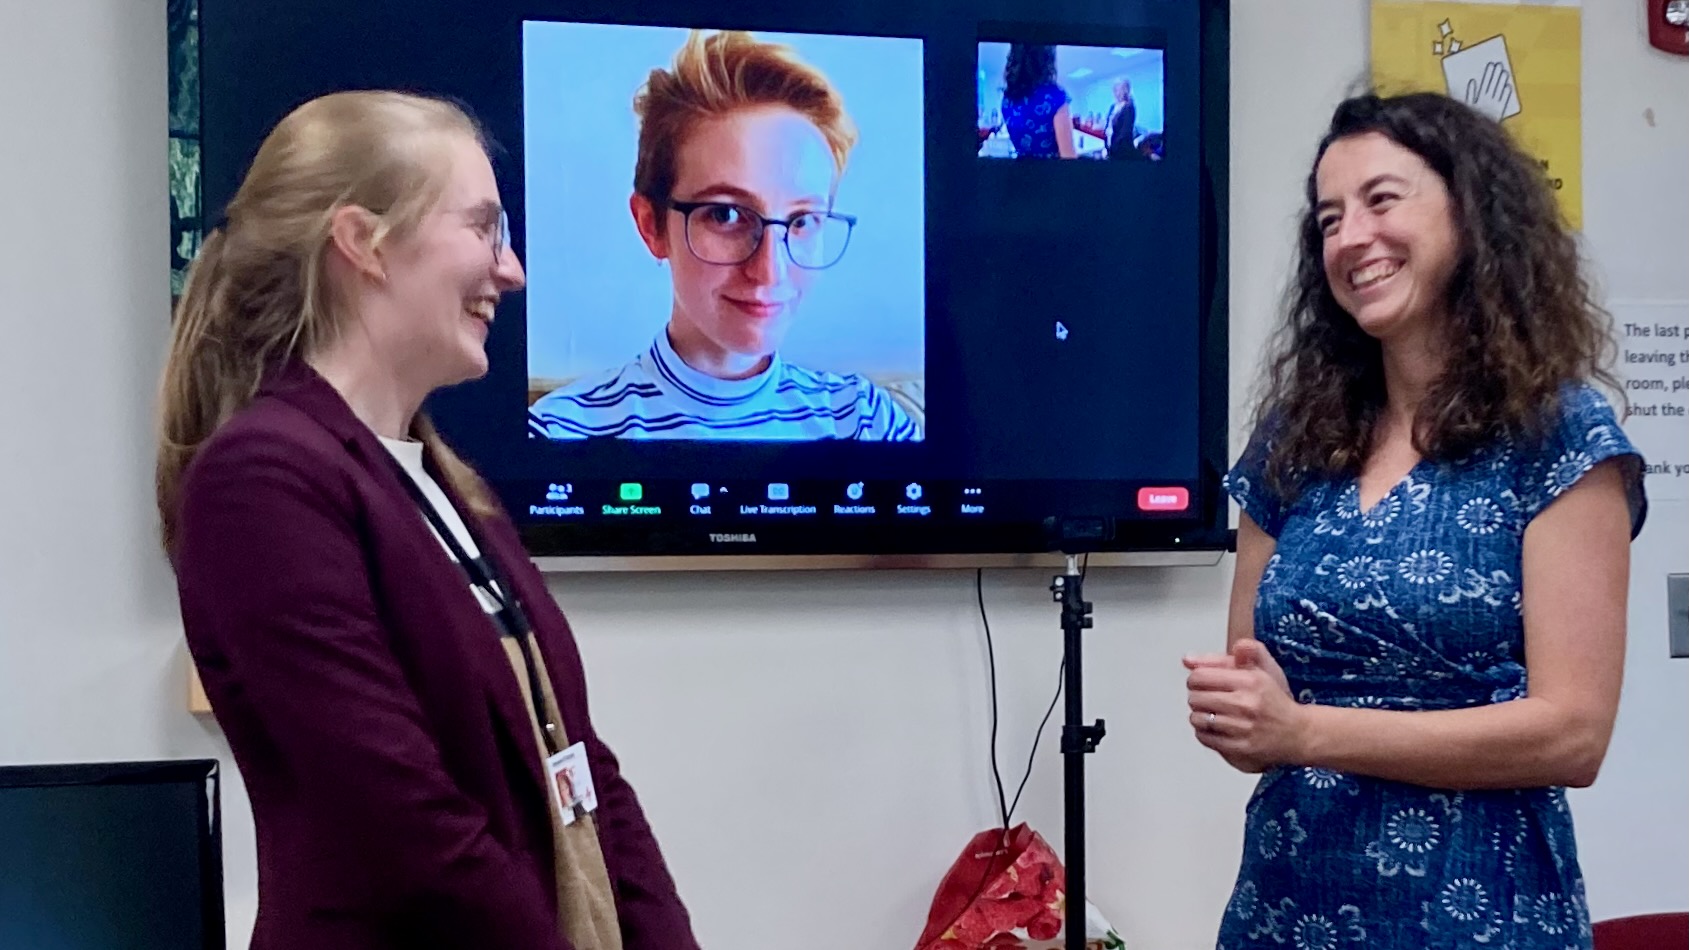 A tv screen displaying a portrait of a young woman, that same woman standing to the left of it, receiving the congratulations of her advisor, Professor Ellen Lau, who stands to the right of the screen, smiling warmly.